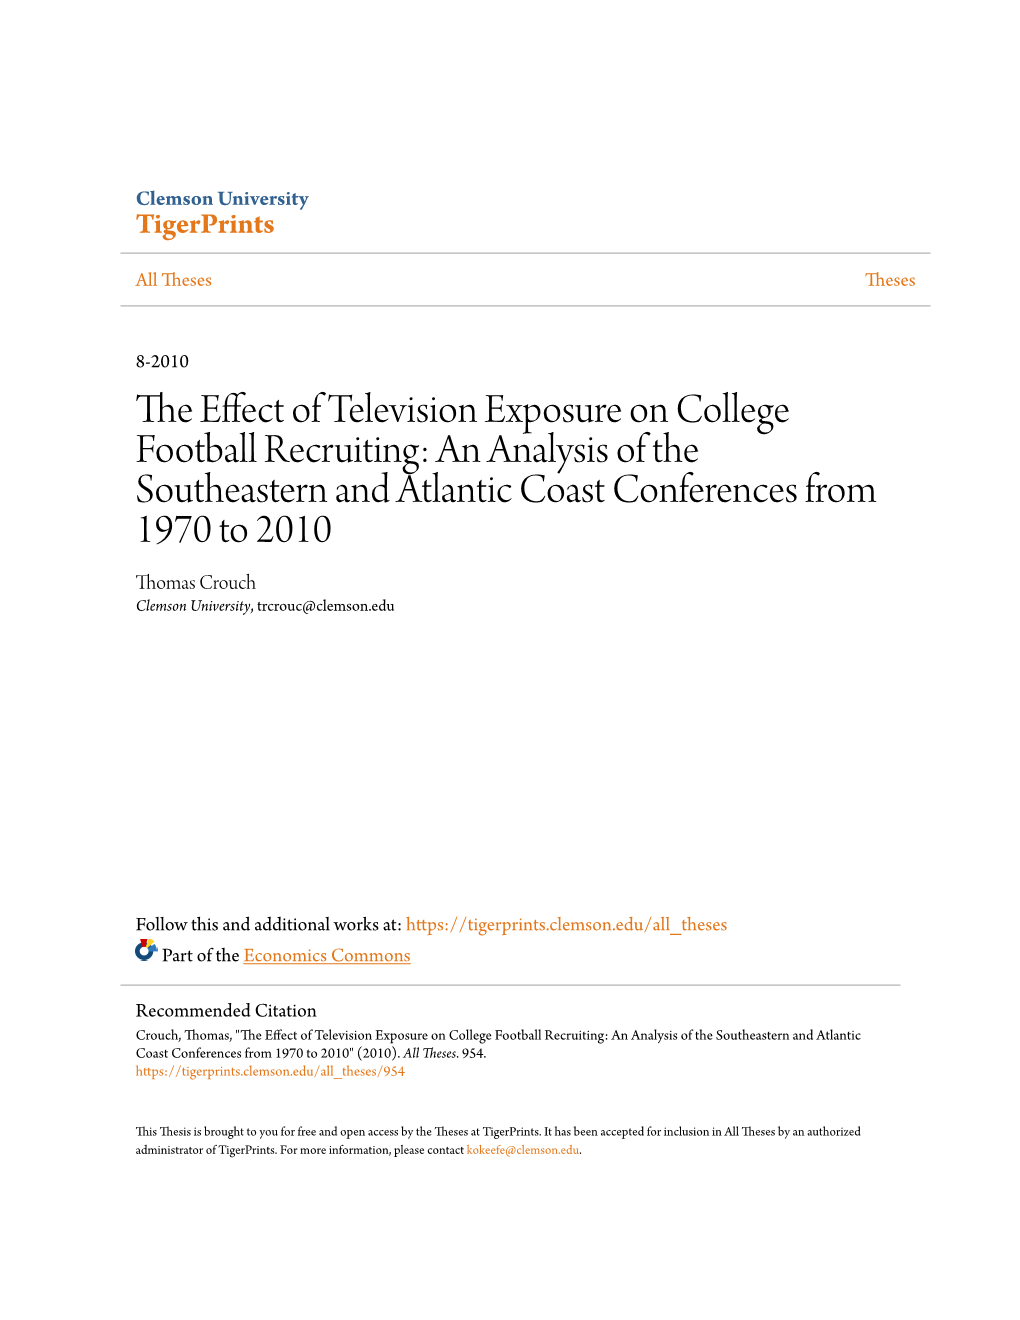 The Effect of Television Exposure on College Football Recruiting: an Analysis of the Southeastern and Atlantic Coast Conferences from 1970 to 2010" (2010)